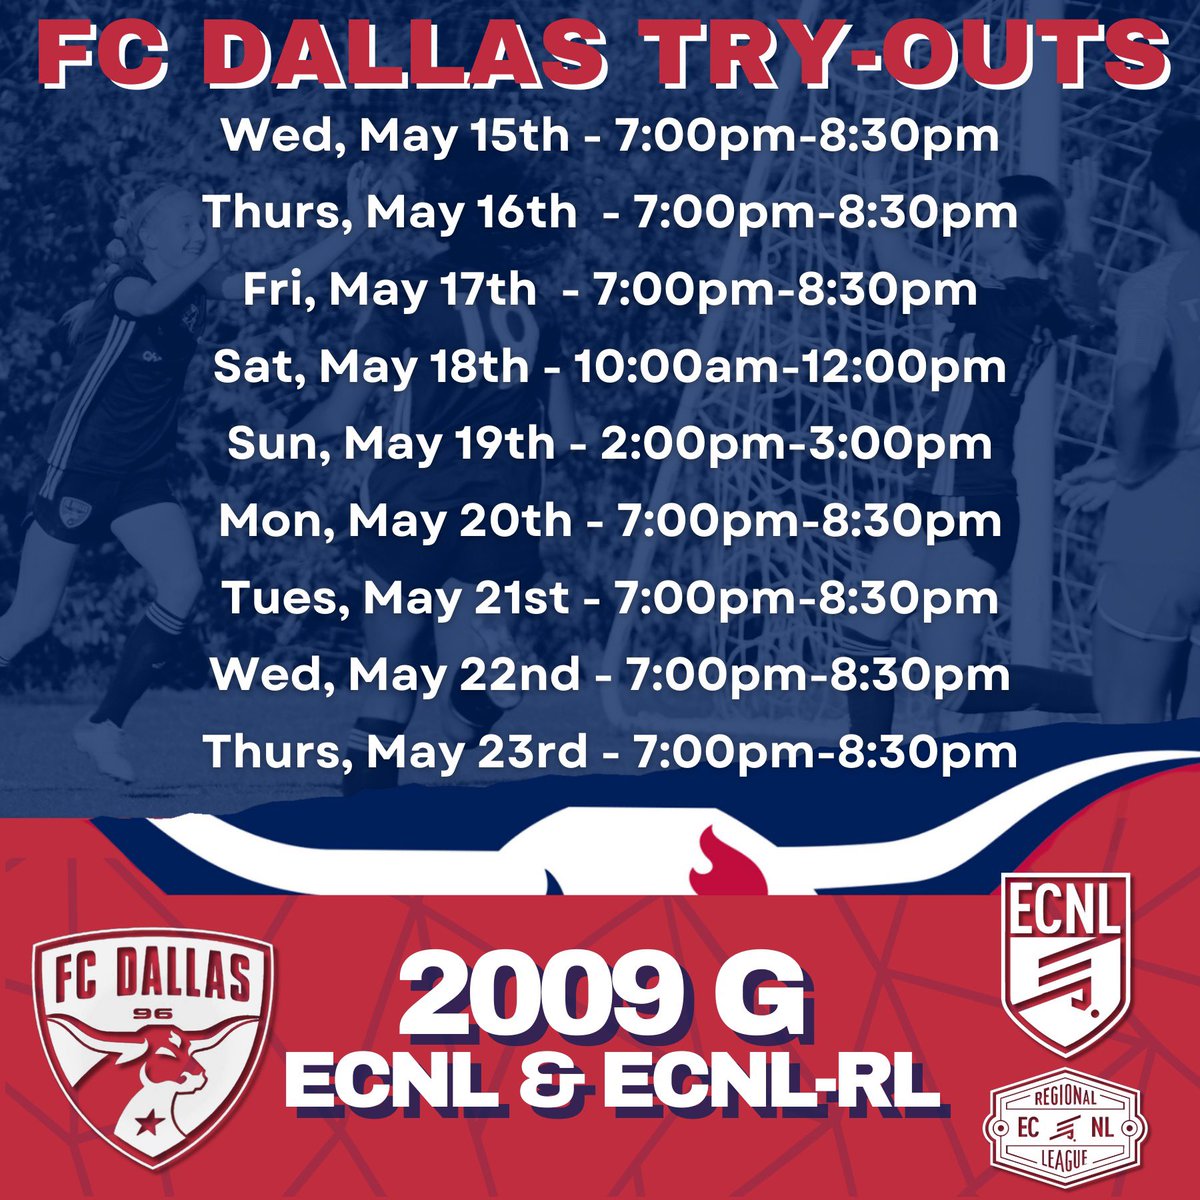 🚨FC Dallas 2024/25 09G ECNL Info🚨 Thrilled for the upcoming year with Coach Matt Grubb & Coach Gareth Evans! Swipe ➡️ for FC Dallas 2009G ECNL & ECNL-RL try out info and use the link below to sign up today! ⬇️ #DTID 💙⚽️❤️ forms.gle/m1yFosAhCmYGLT…